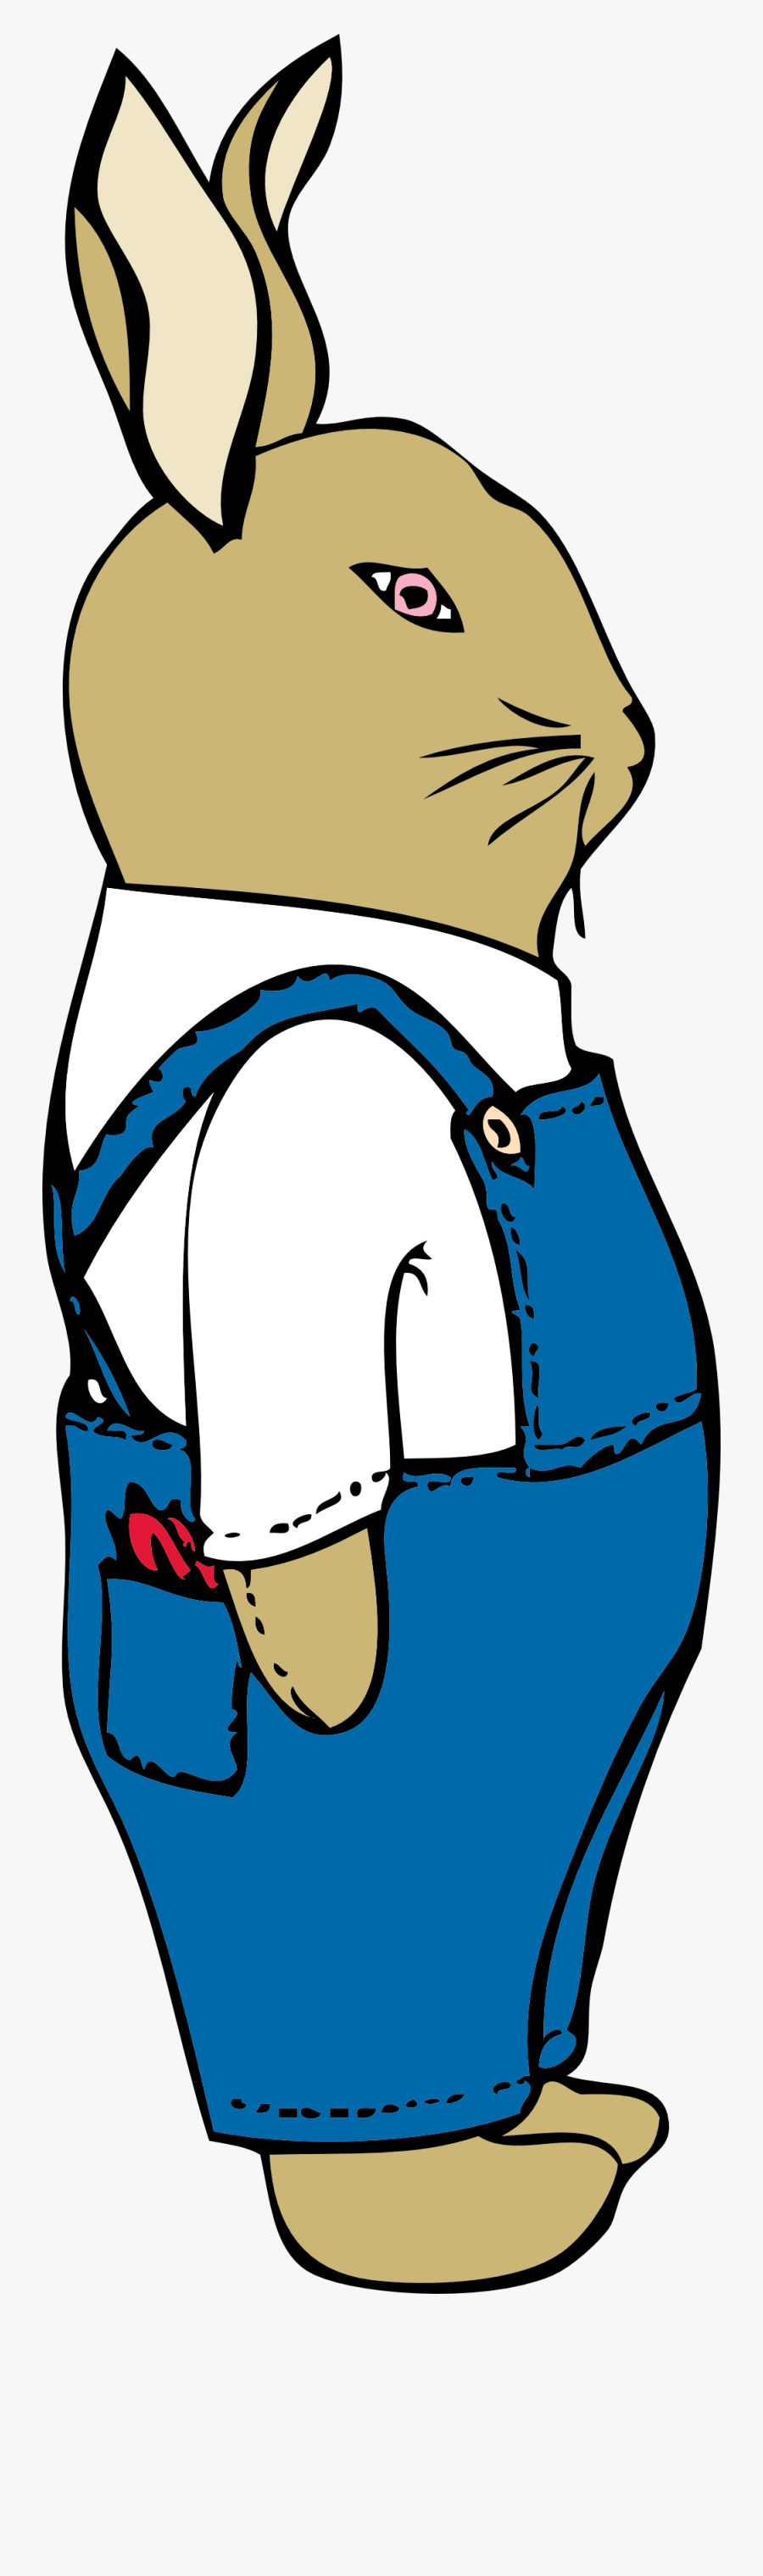 Bunny In Overalls, Transparent Clipart